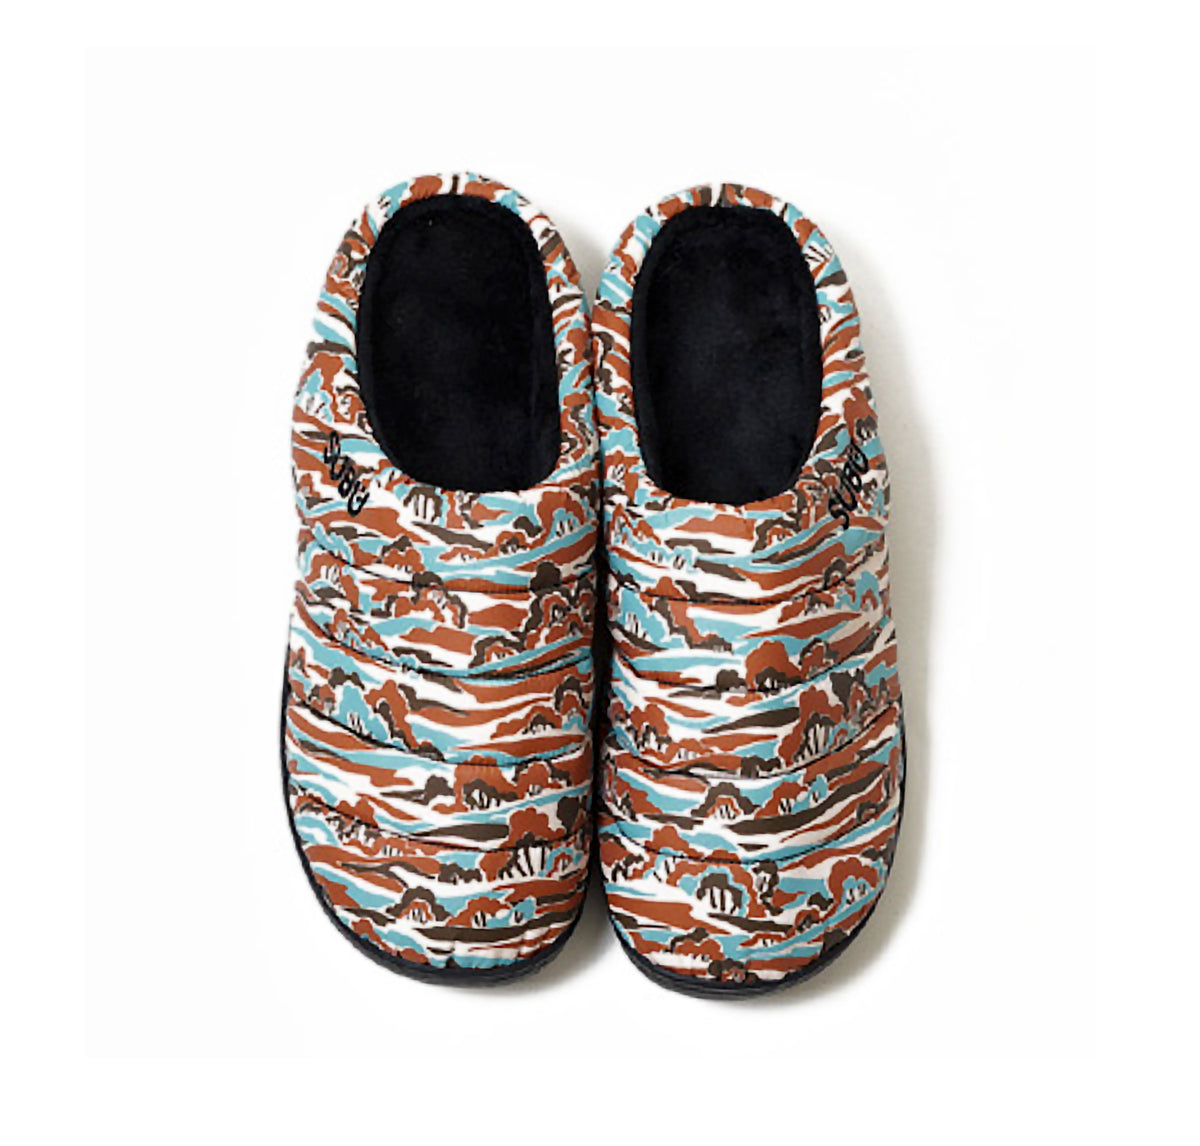 SUBU, Fall & Winter Concept Slippers - Landscape, 0